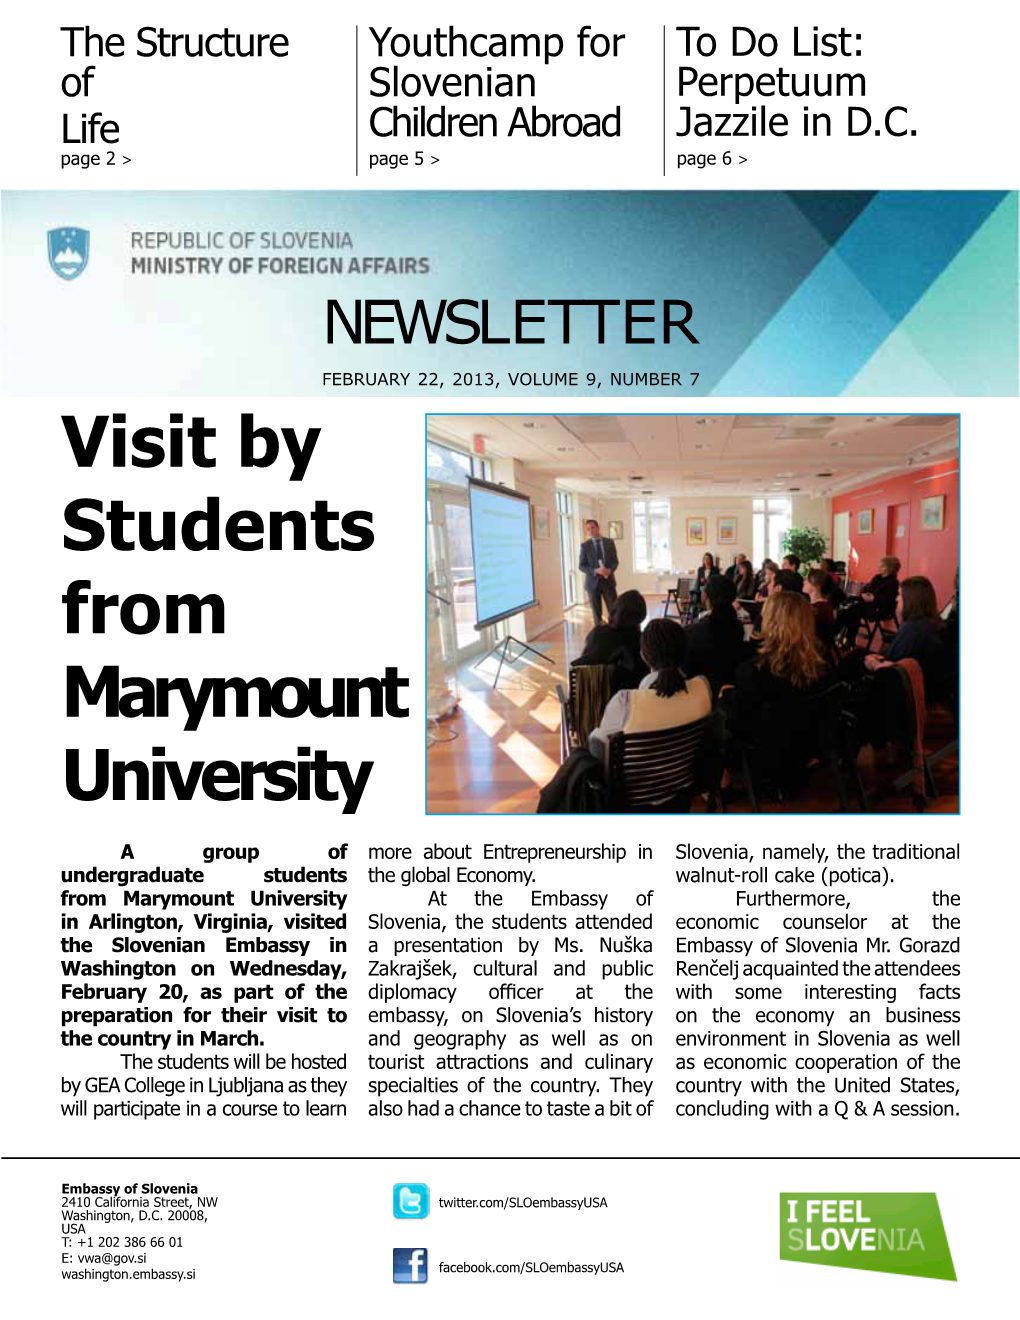 Visit by Students from Marymount University